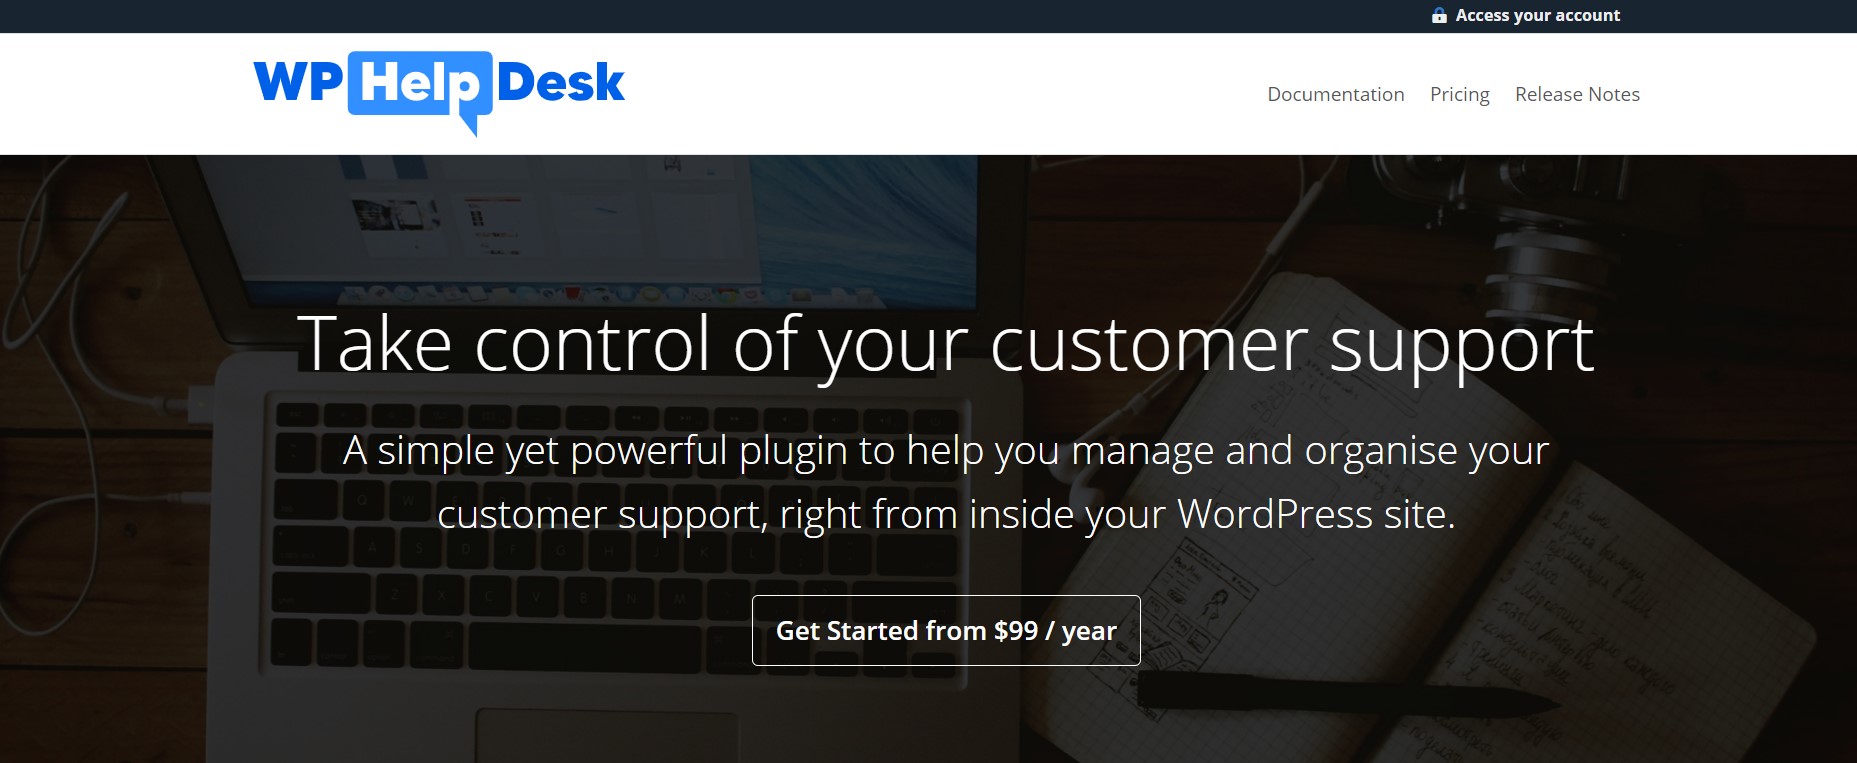 wp helpdesk pricing page